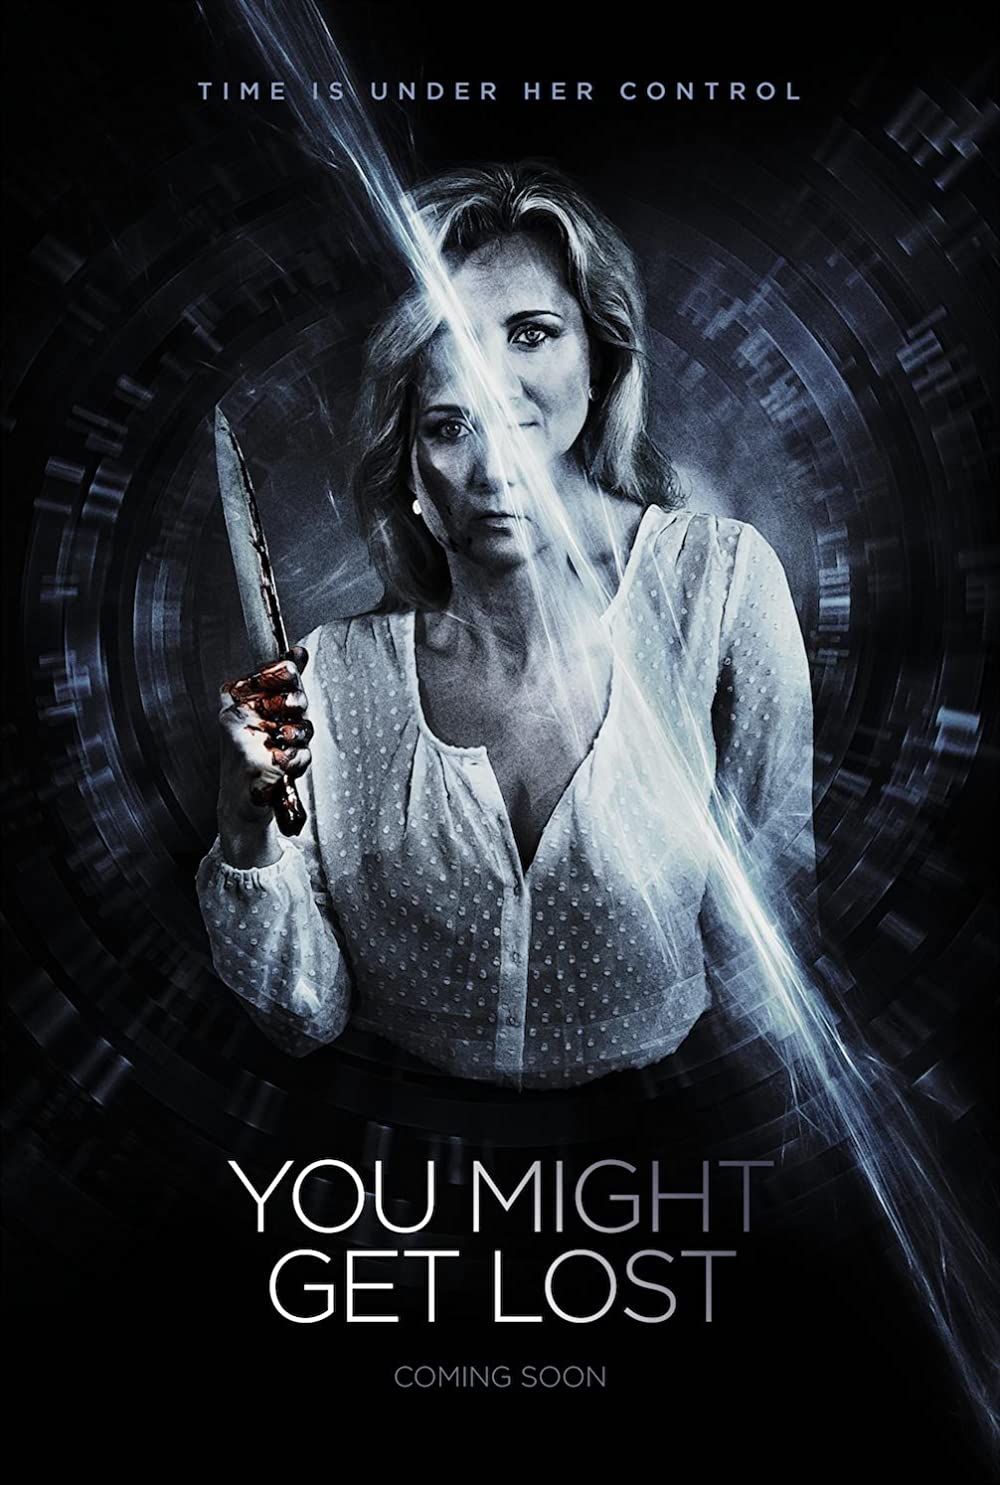 Image shows woman  with knife and the words 'You might get lost' 